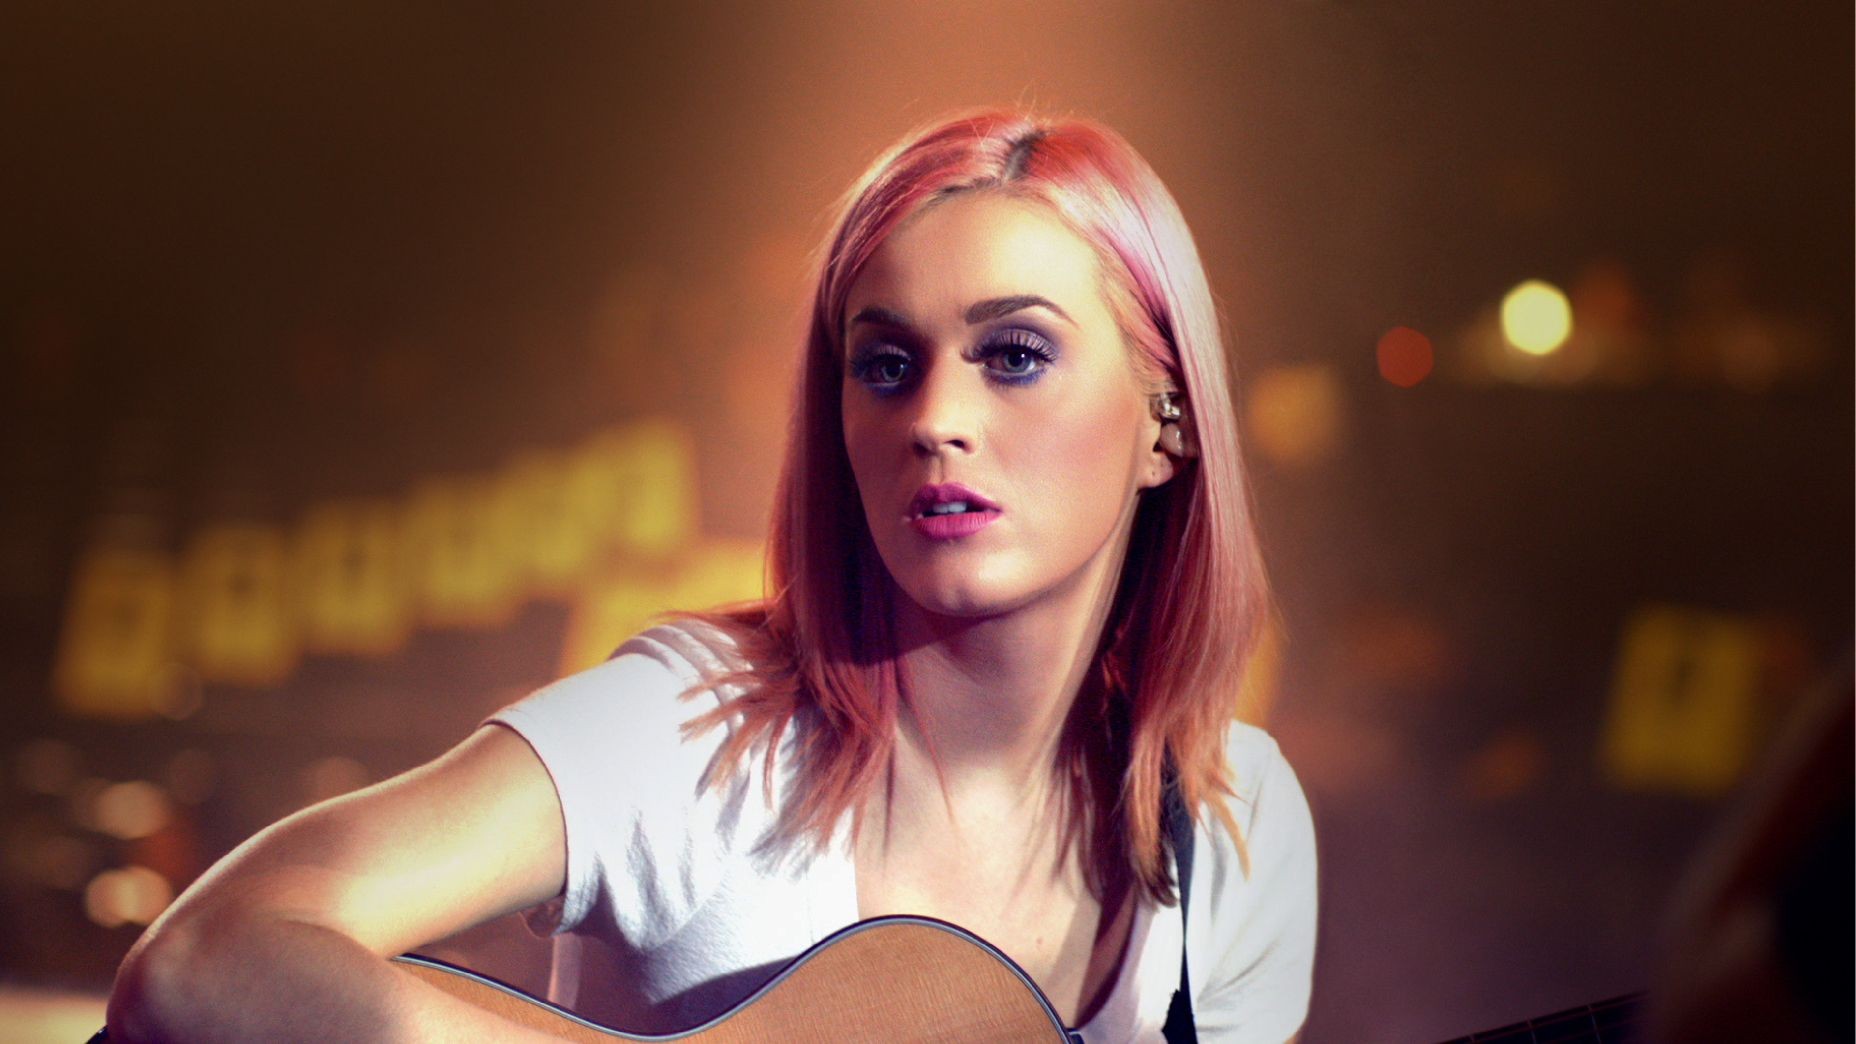 Katy Perry stars as Herself/Kathy Beth Terry in Paramount Pictures' Katy Perry: Part of Me (2012)